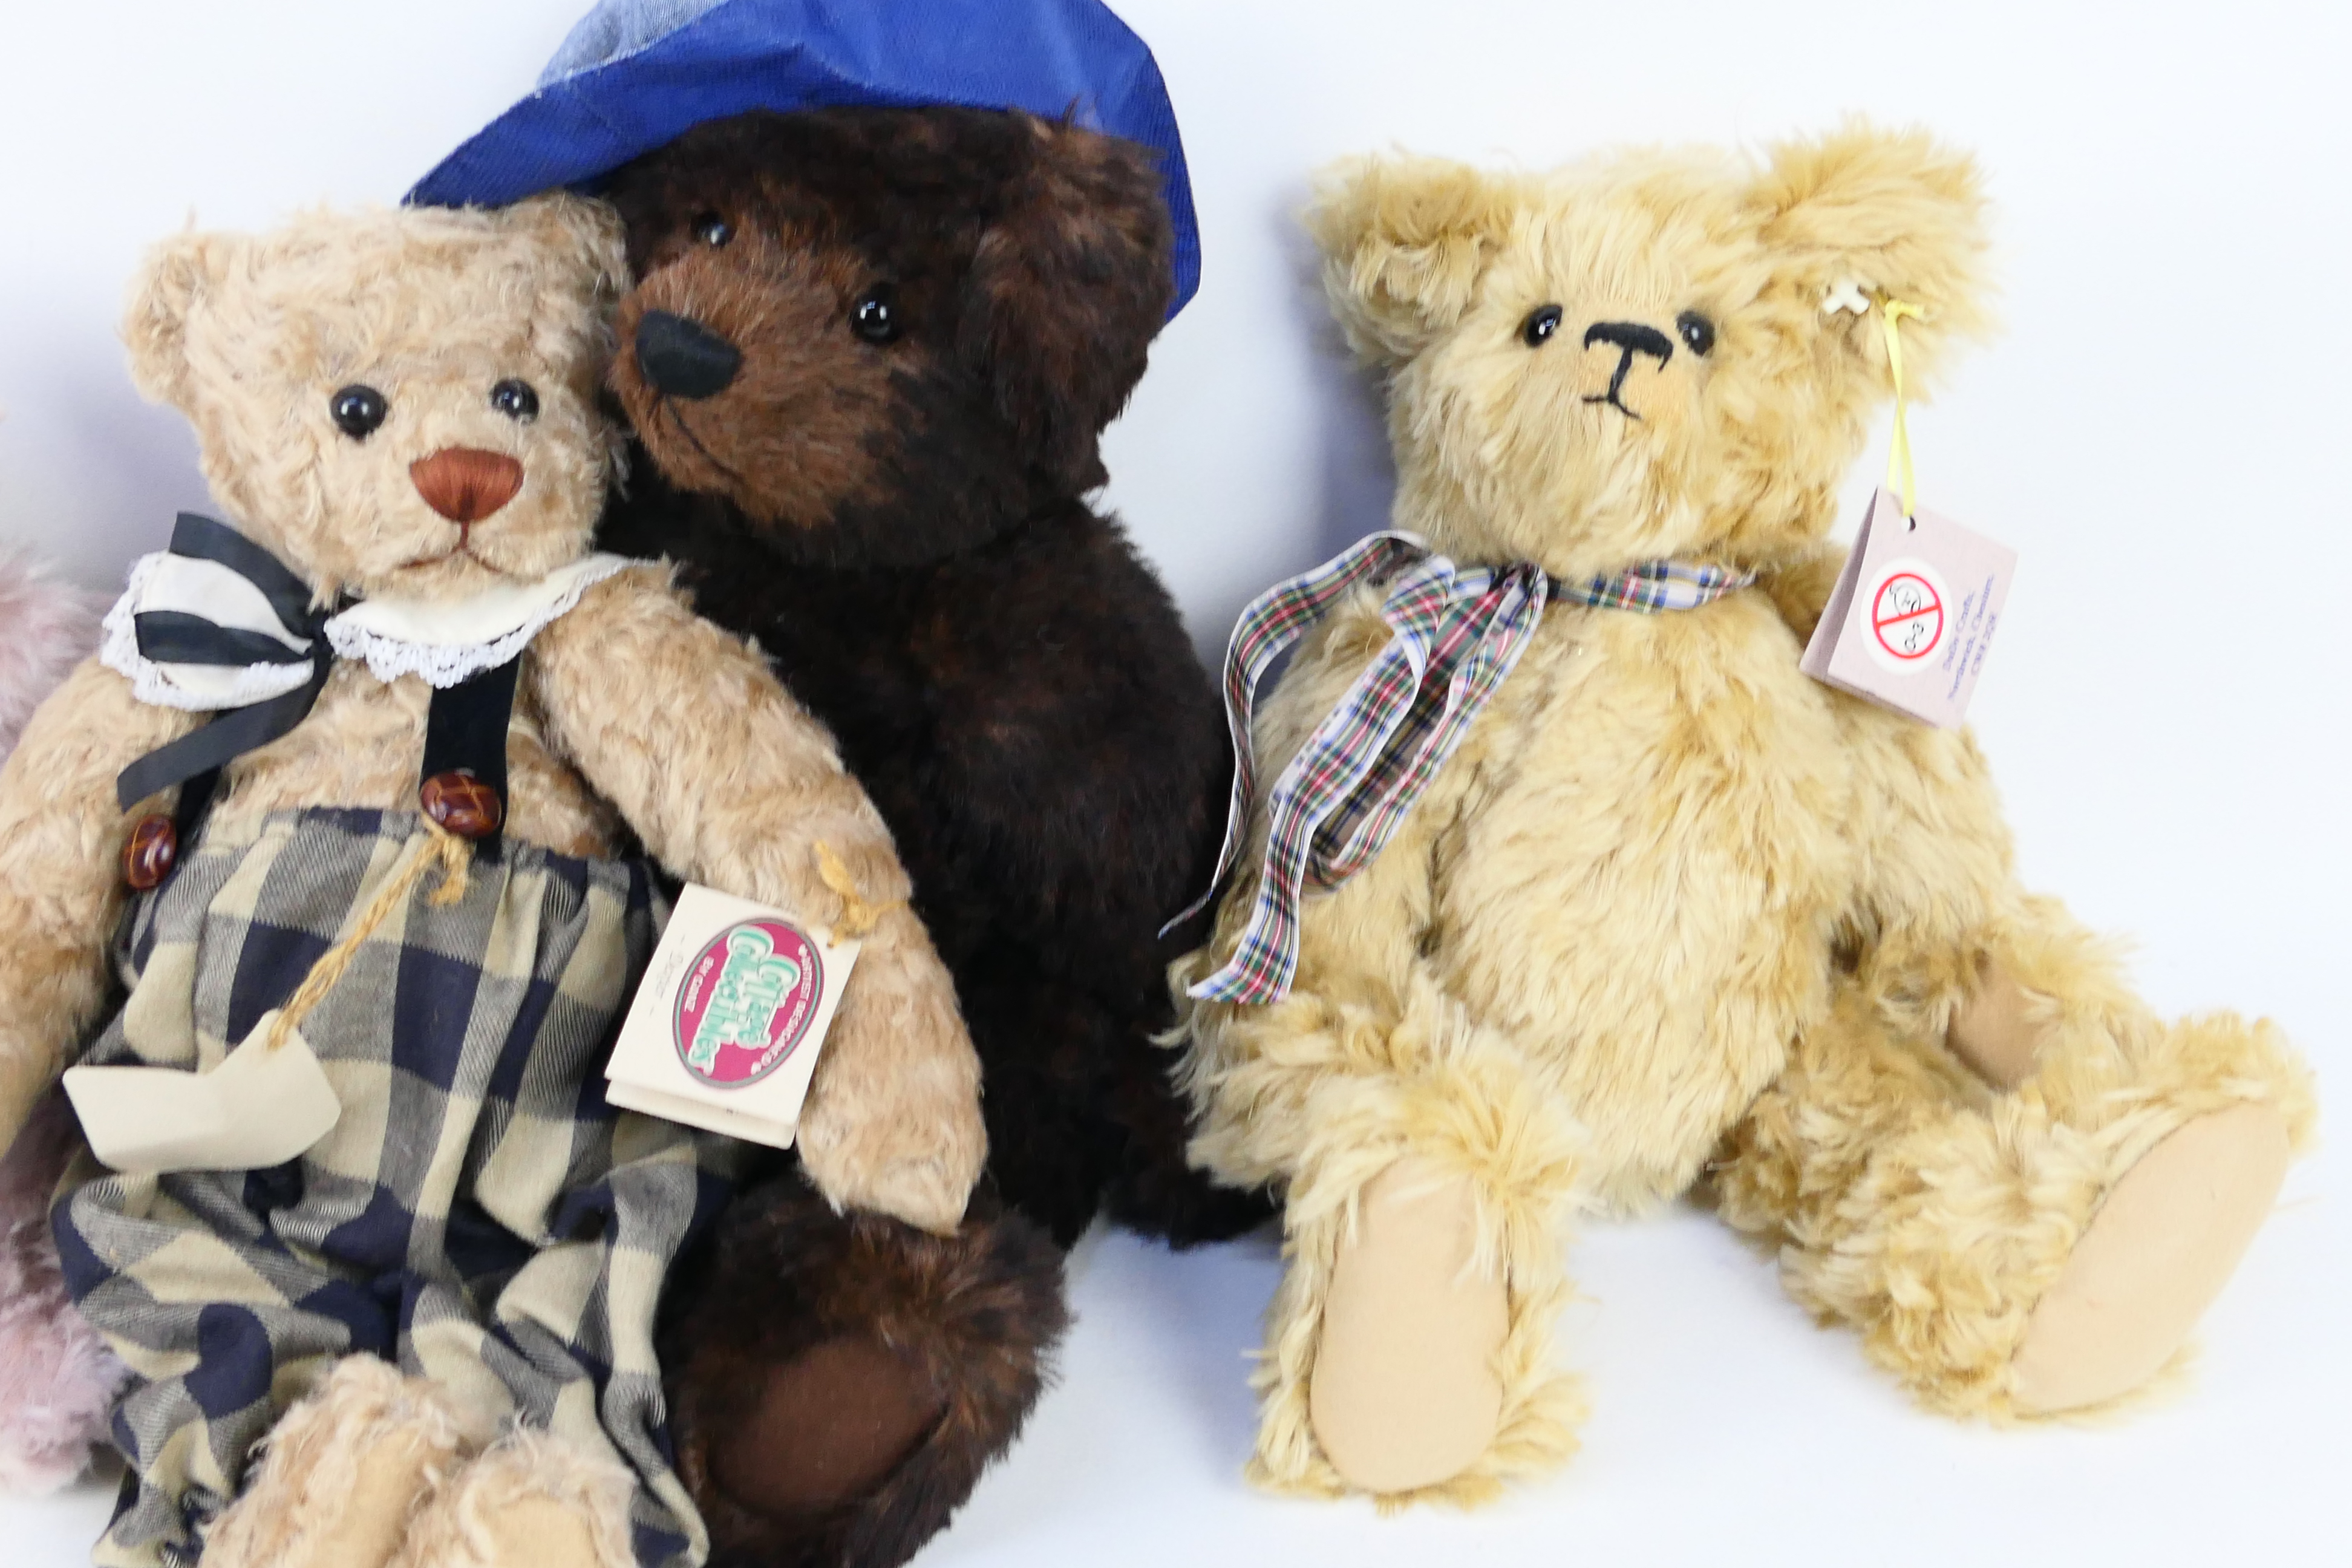 Bilbo Bears, Cottage Collectibles, The Teddy Bear Shop, DaDo Crafts, Juggley Bears, - Image 5 of 5